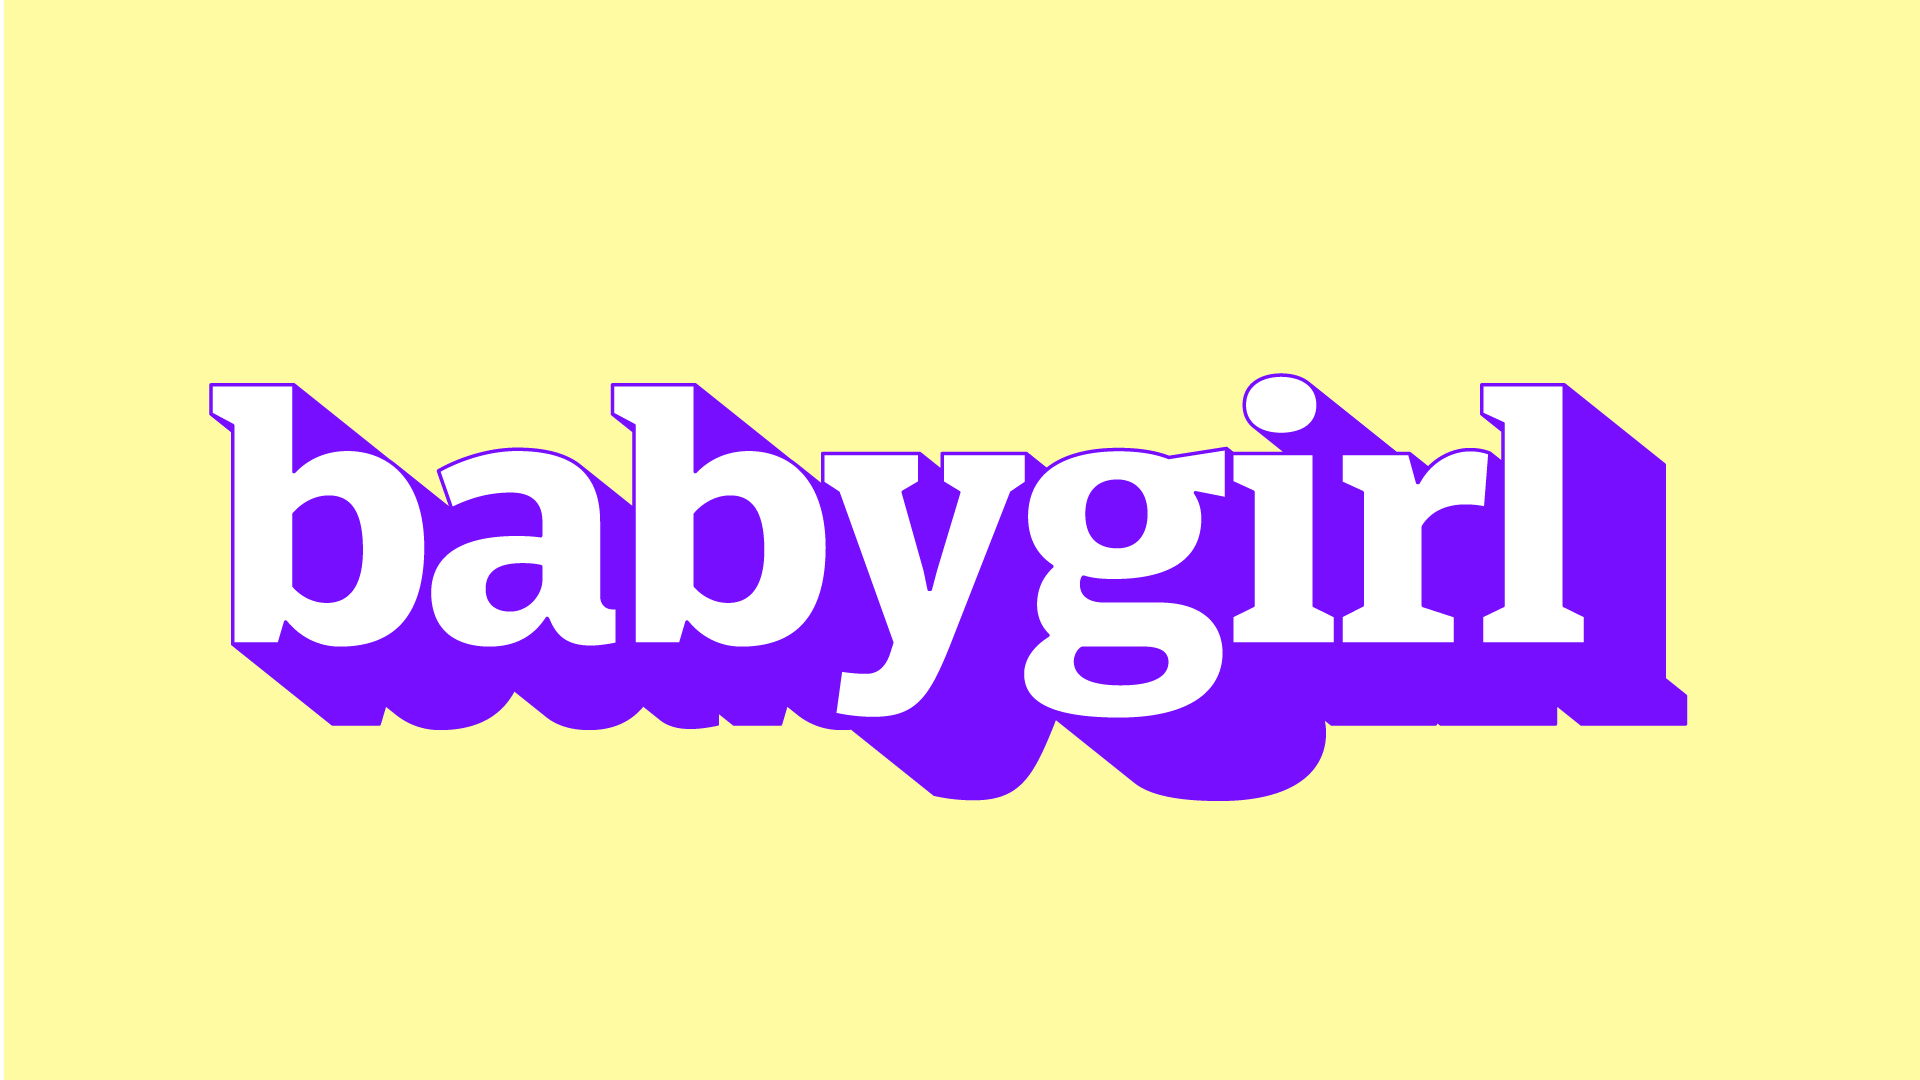 What's The New Slang Meaning Of "Babygirl"?